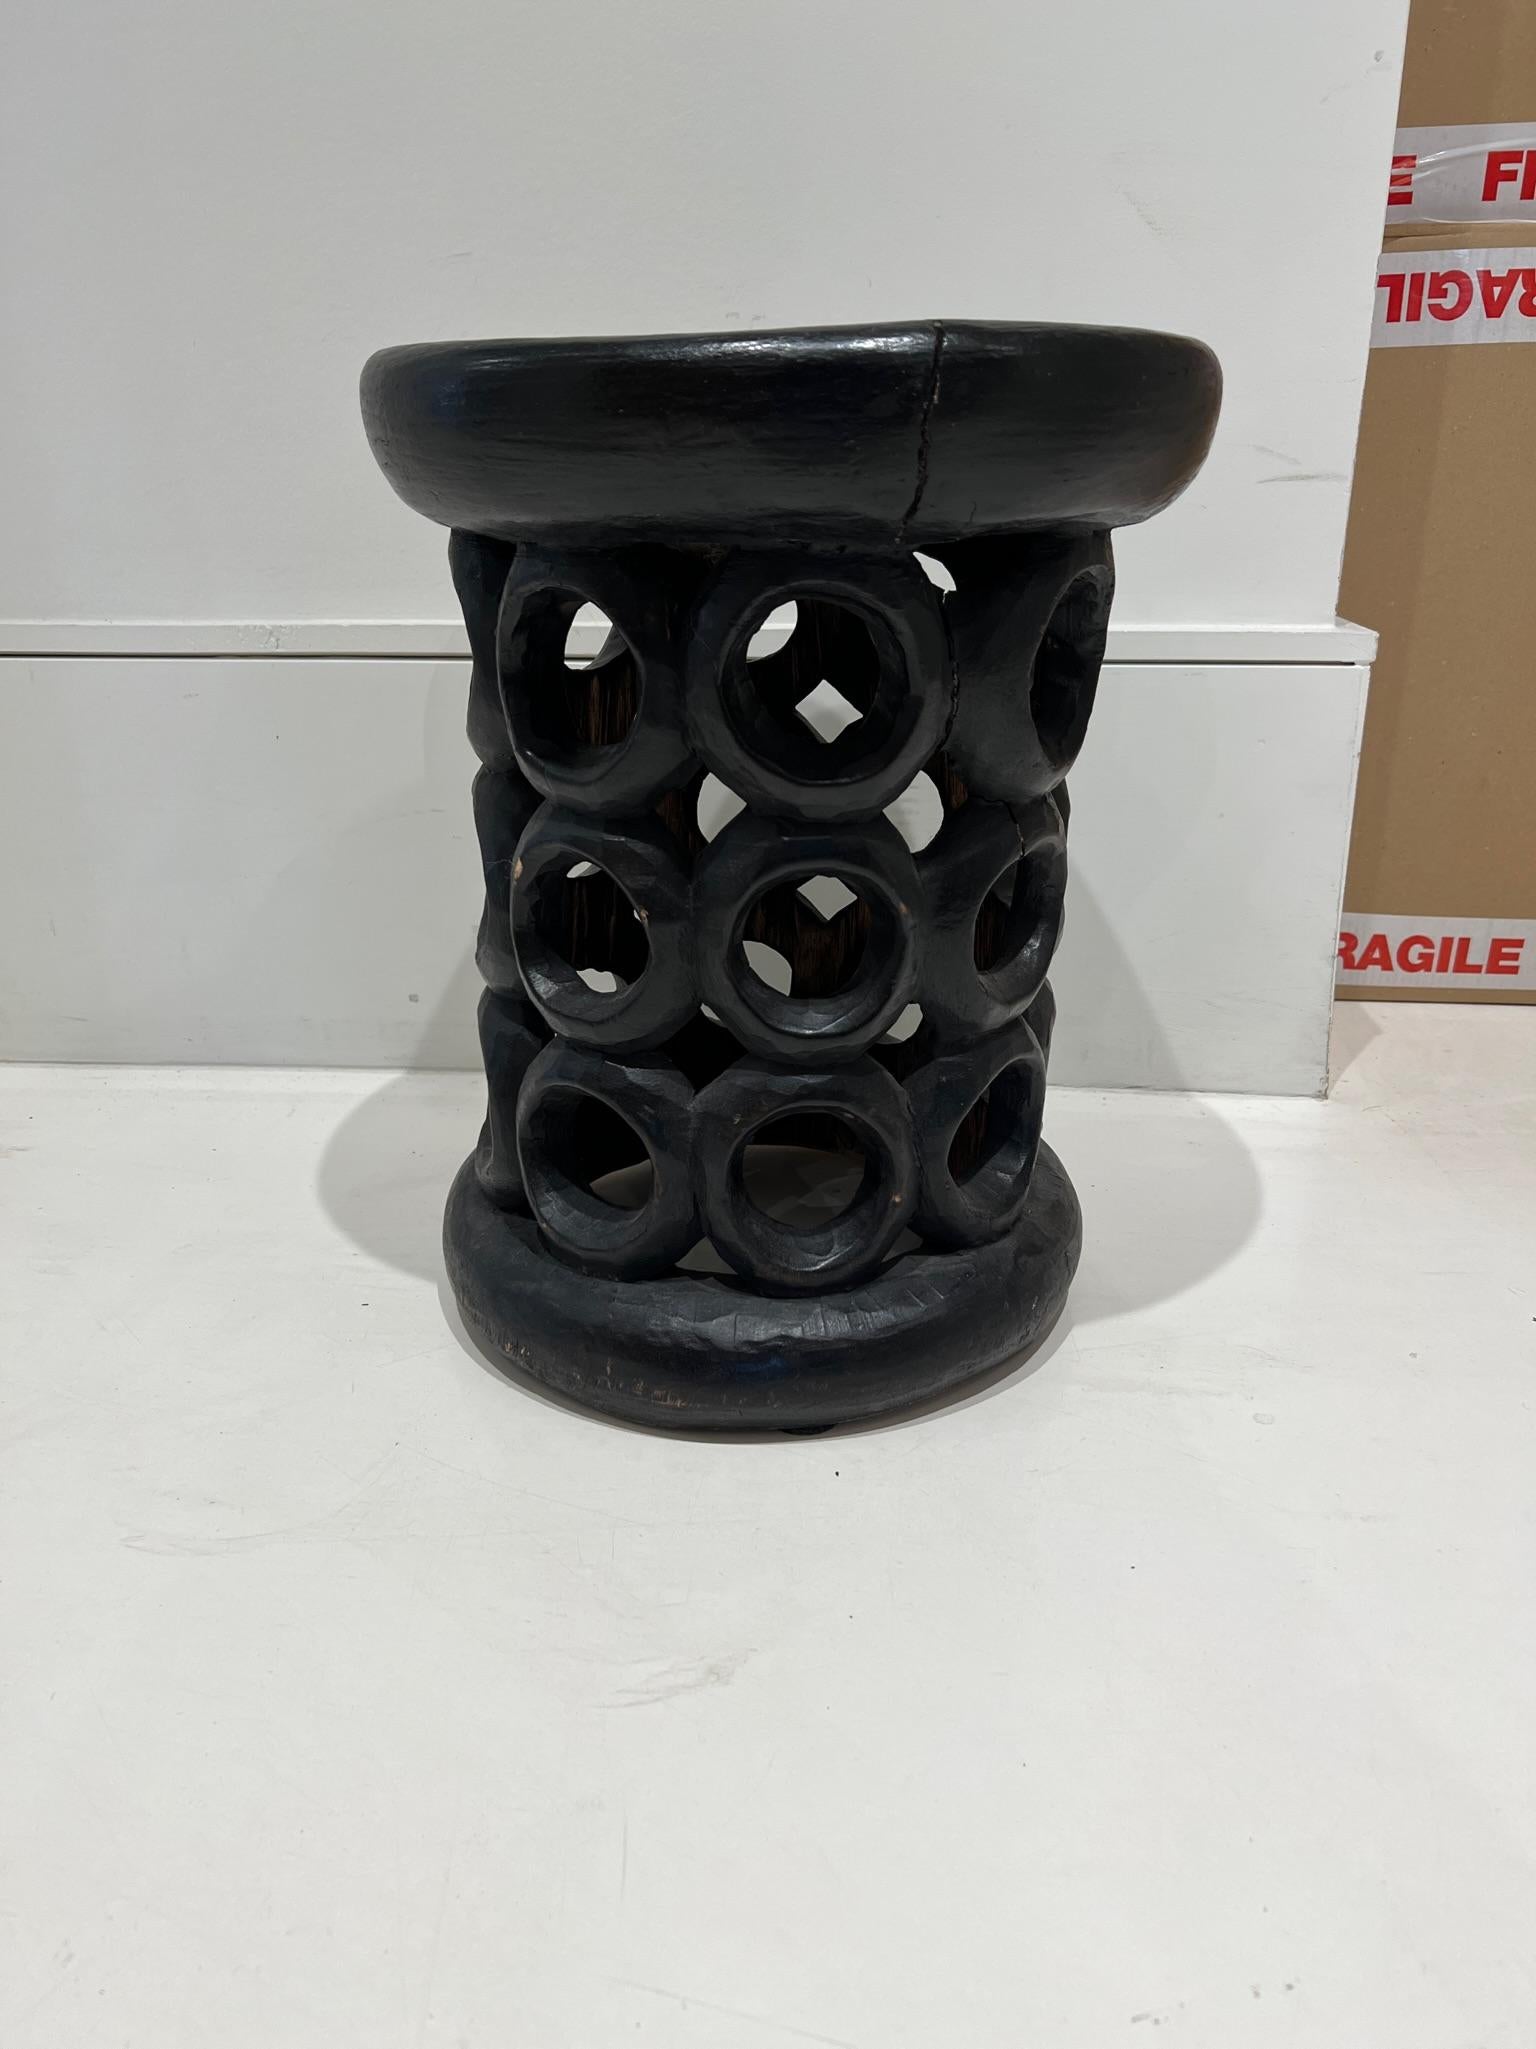 This is the perfect stool or small side table that is lightweight and very decorative.  It looks good next to anything you put it next to, antique or contemporary.   